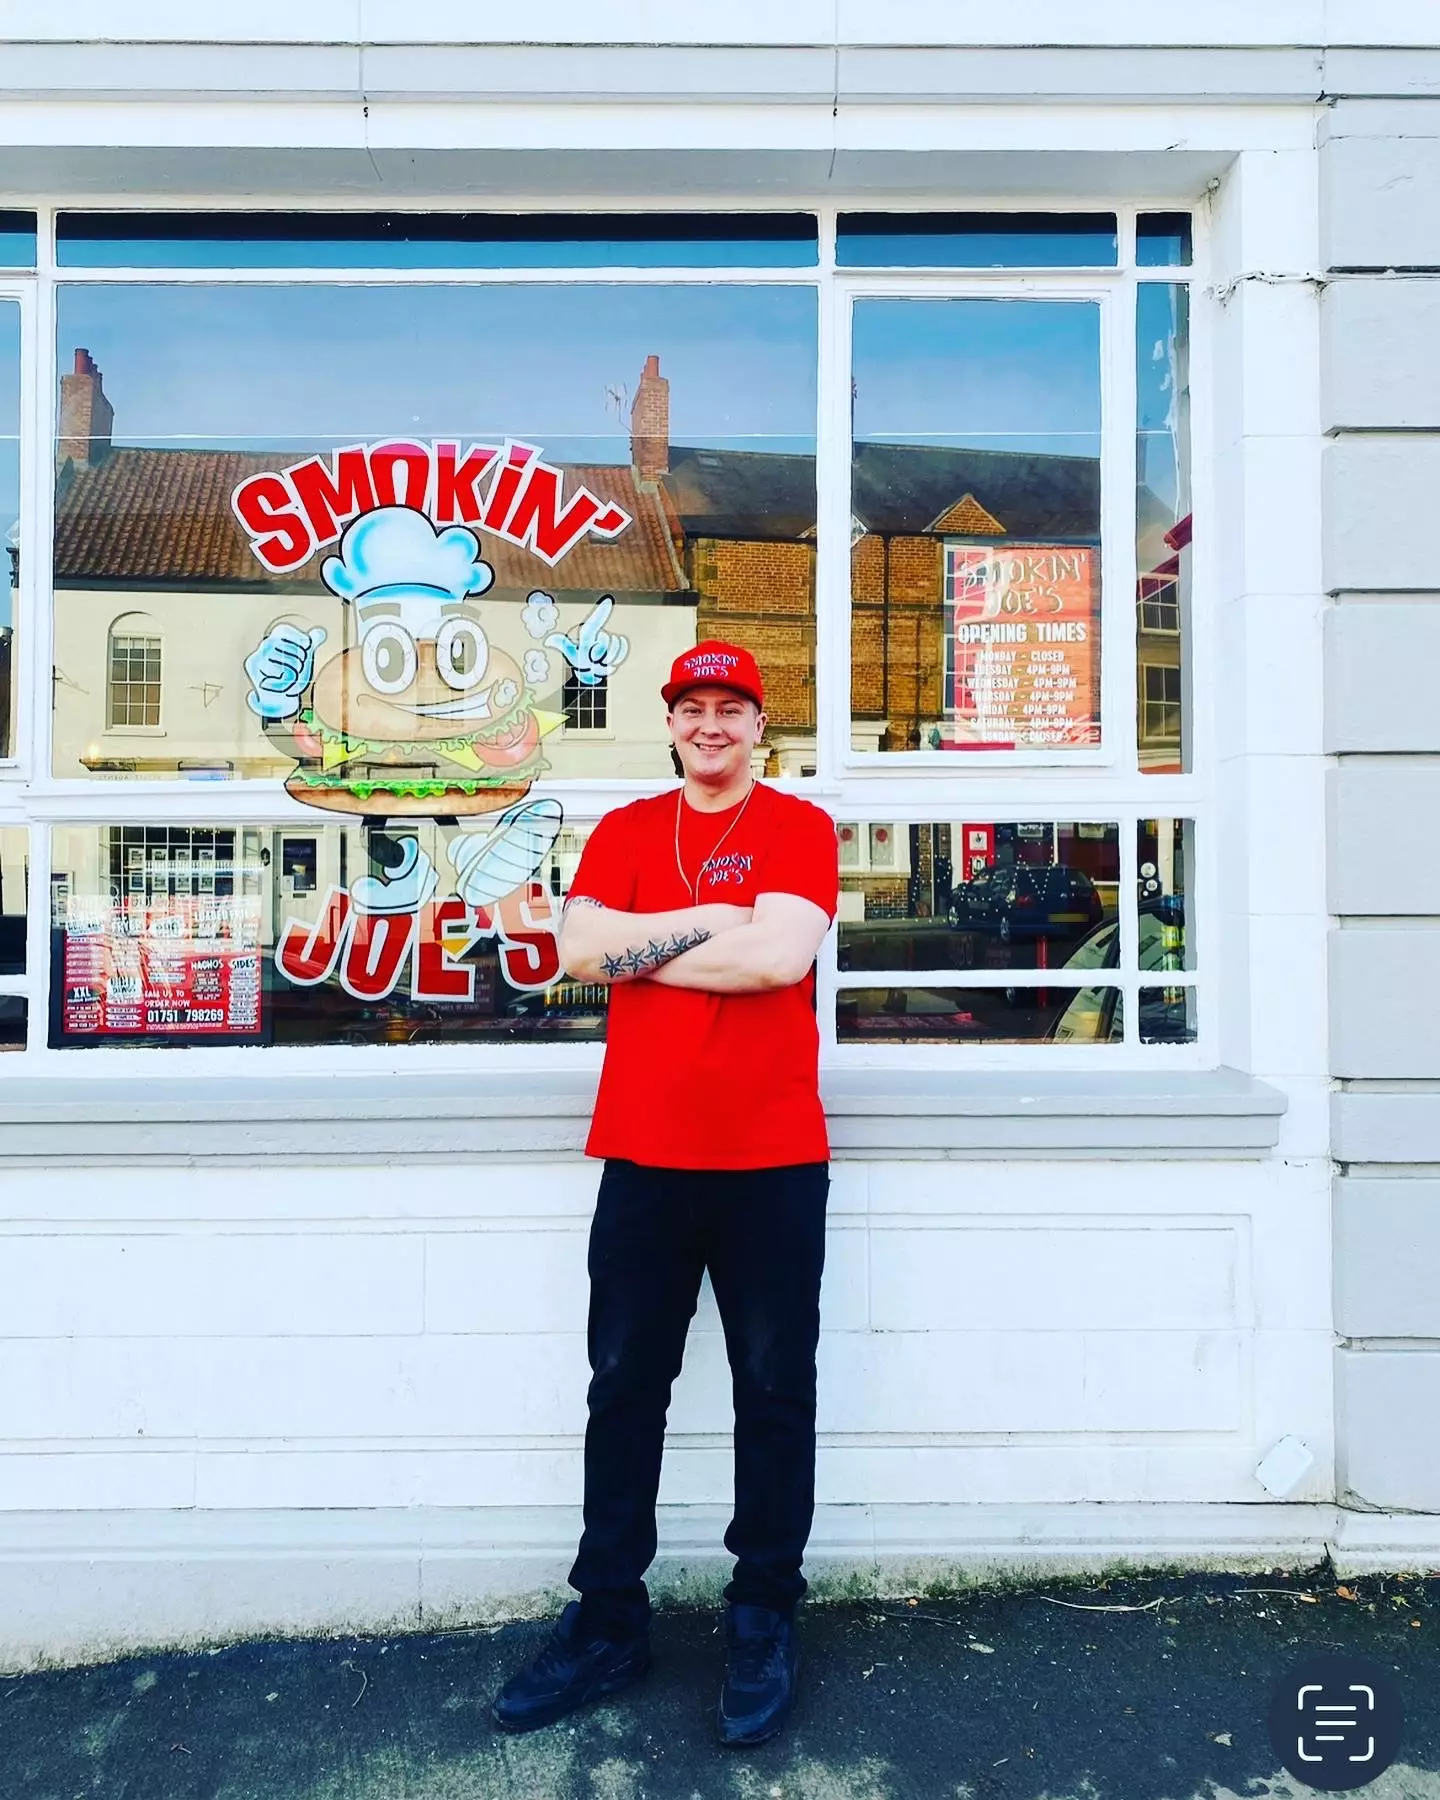 Joseph Smith, who owns Smokin' Joe's diner has hit back at trolls in a genius marketing move.